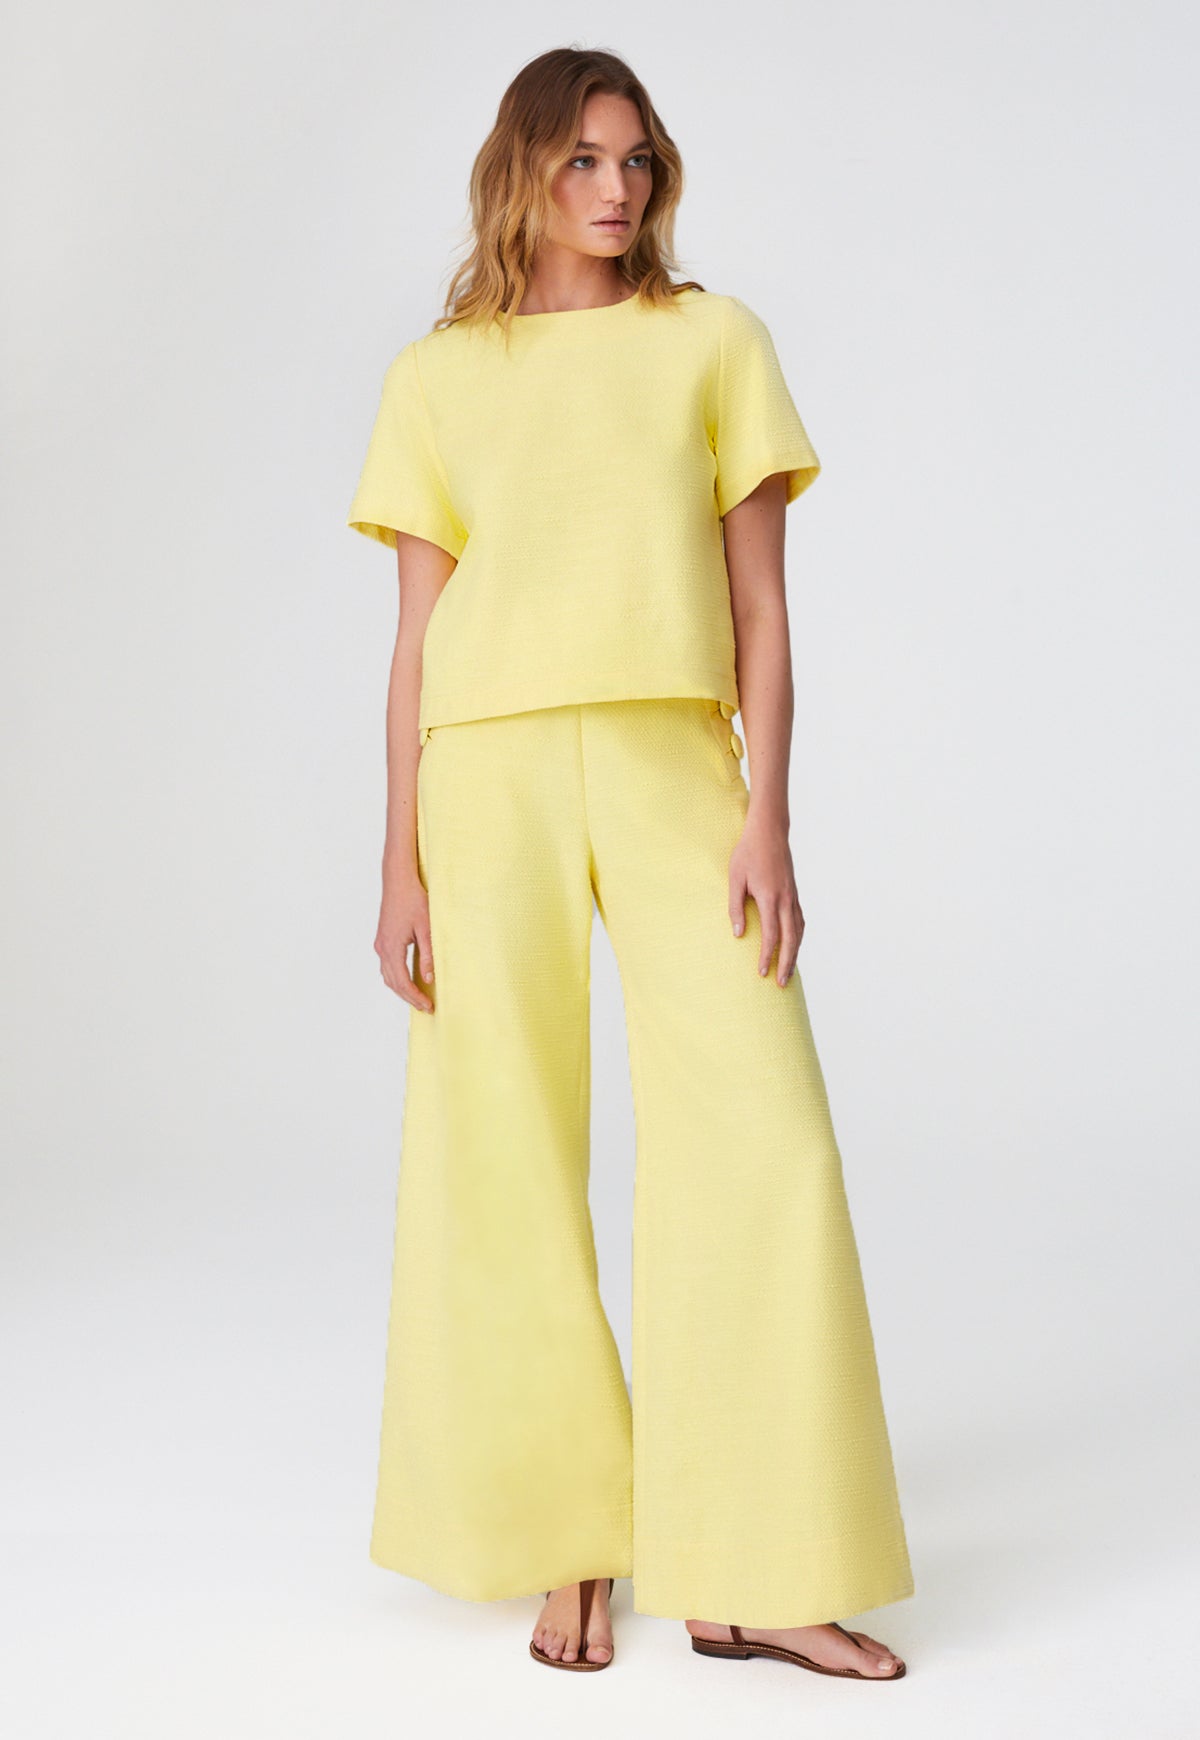 THE T-SHIRT in LEMON TEXTURED COTTON